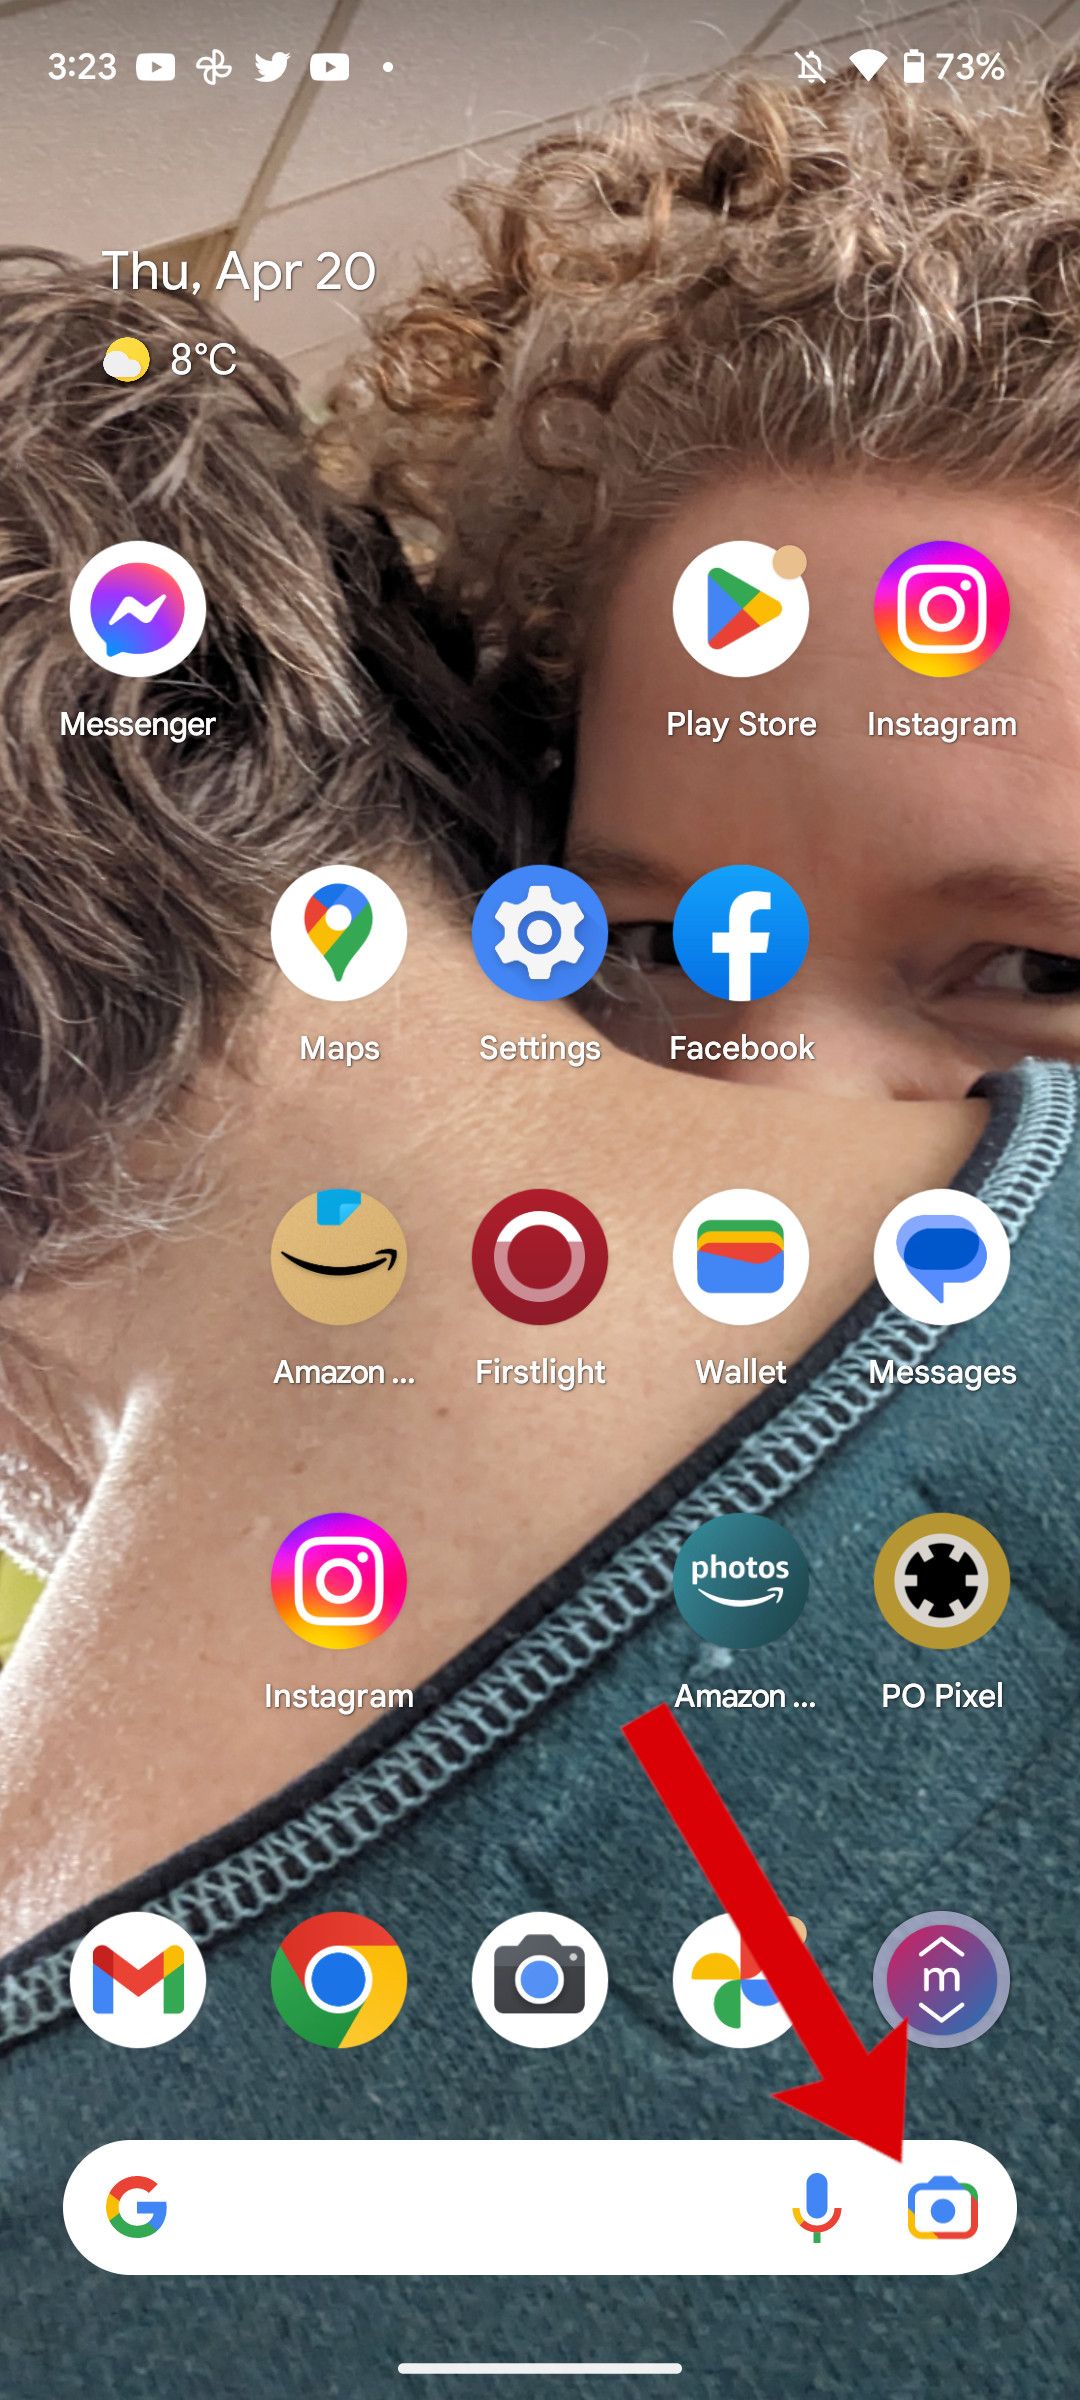 A screenshot of the Android home screen with an arrow pointing to the Google Lens icon.